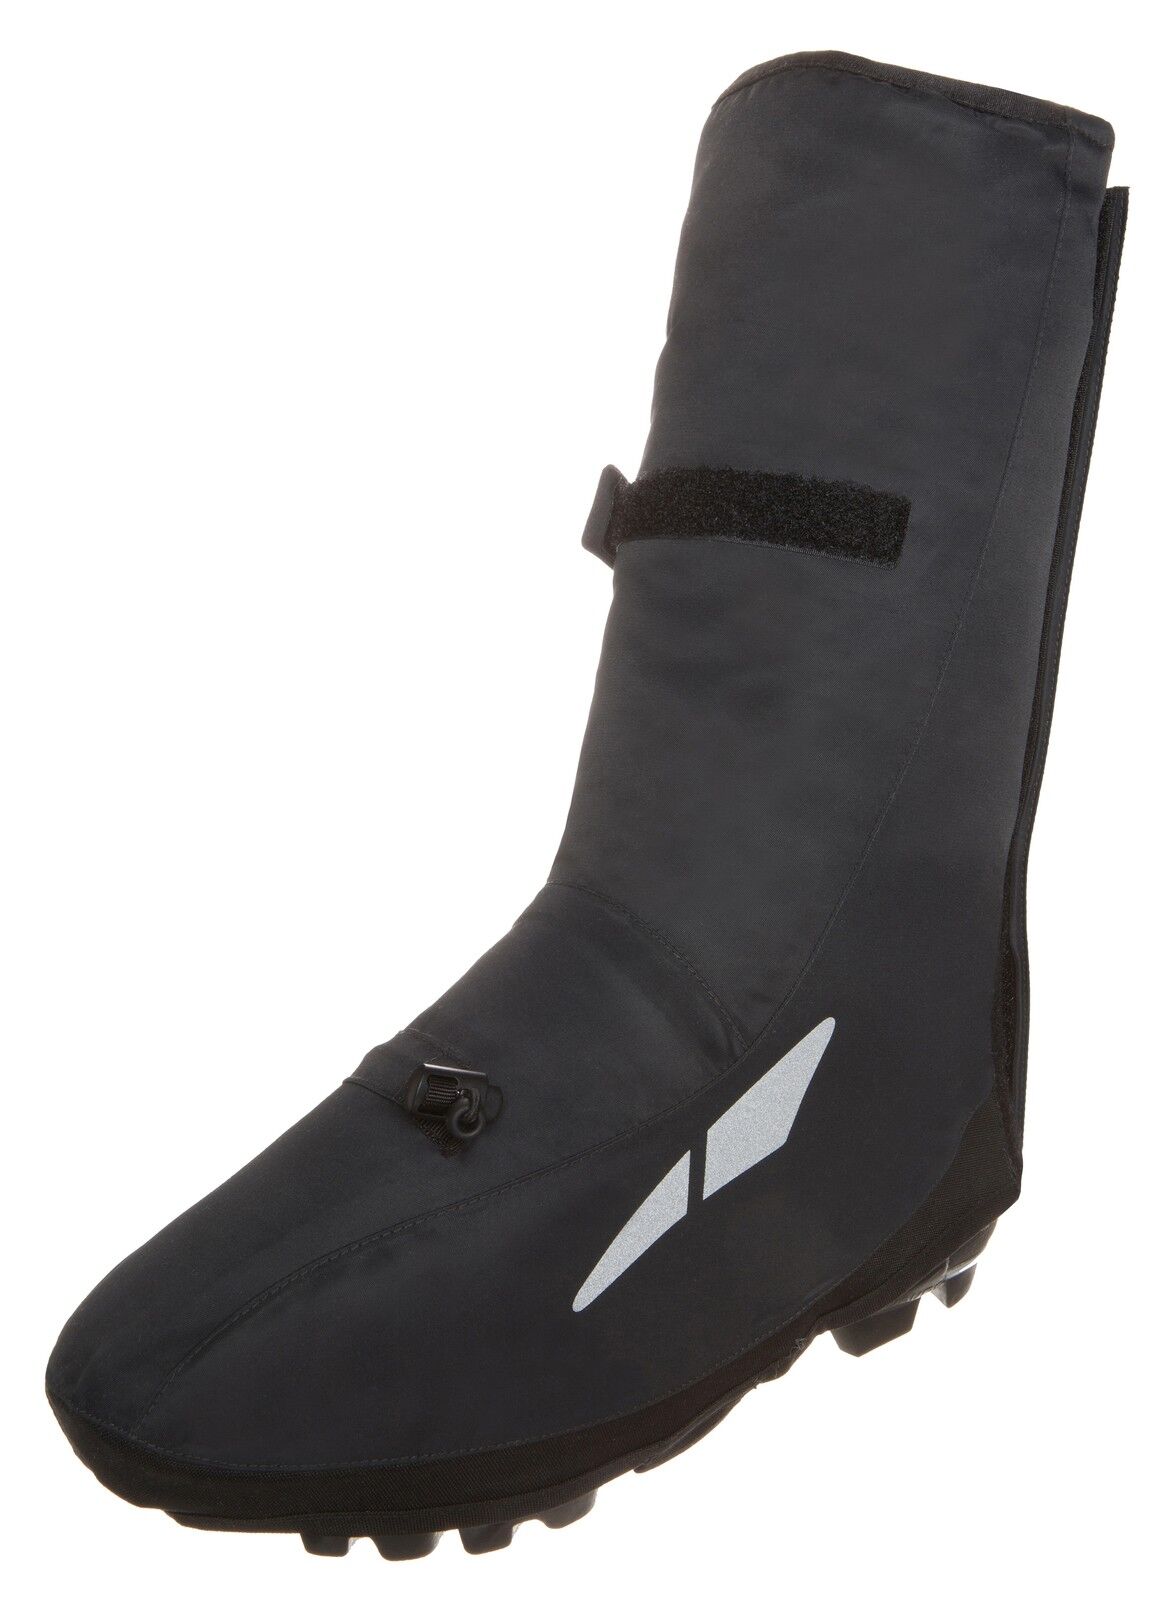 Vaude Shoecover Capital Plus - Cycling overshoes | Hardloop